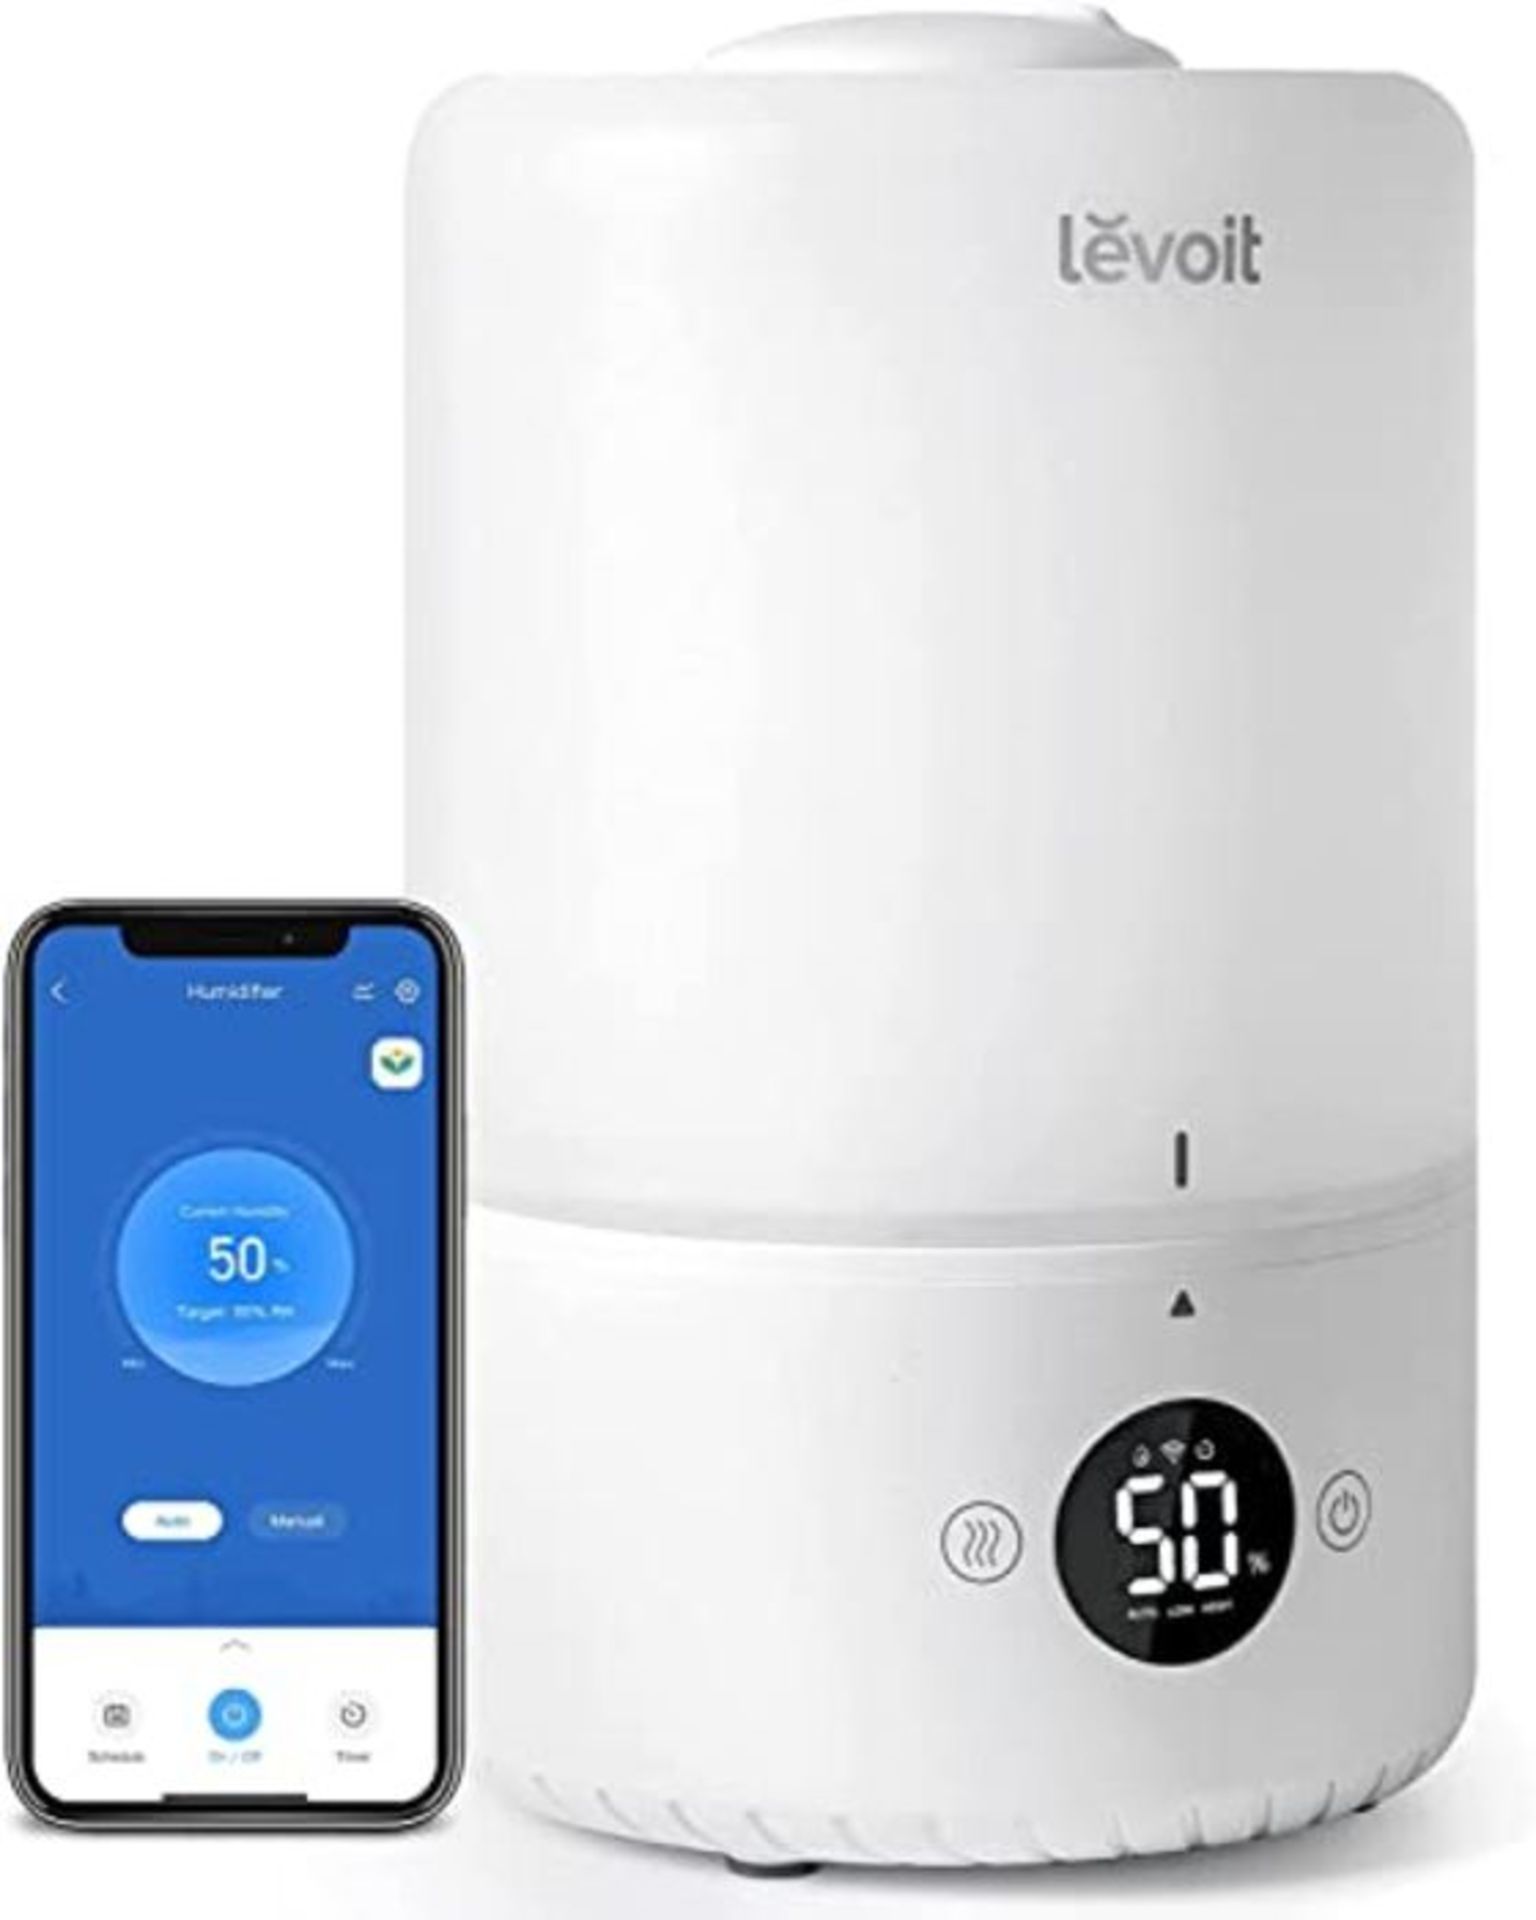 RRP £50.00 LEVOIT Humidifiers for Bedroom 3L, Top-Fill Cool Humidifier for Baby Room & Home, Smar